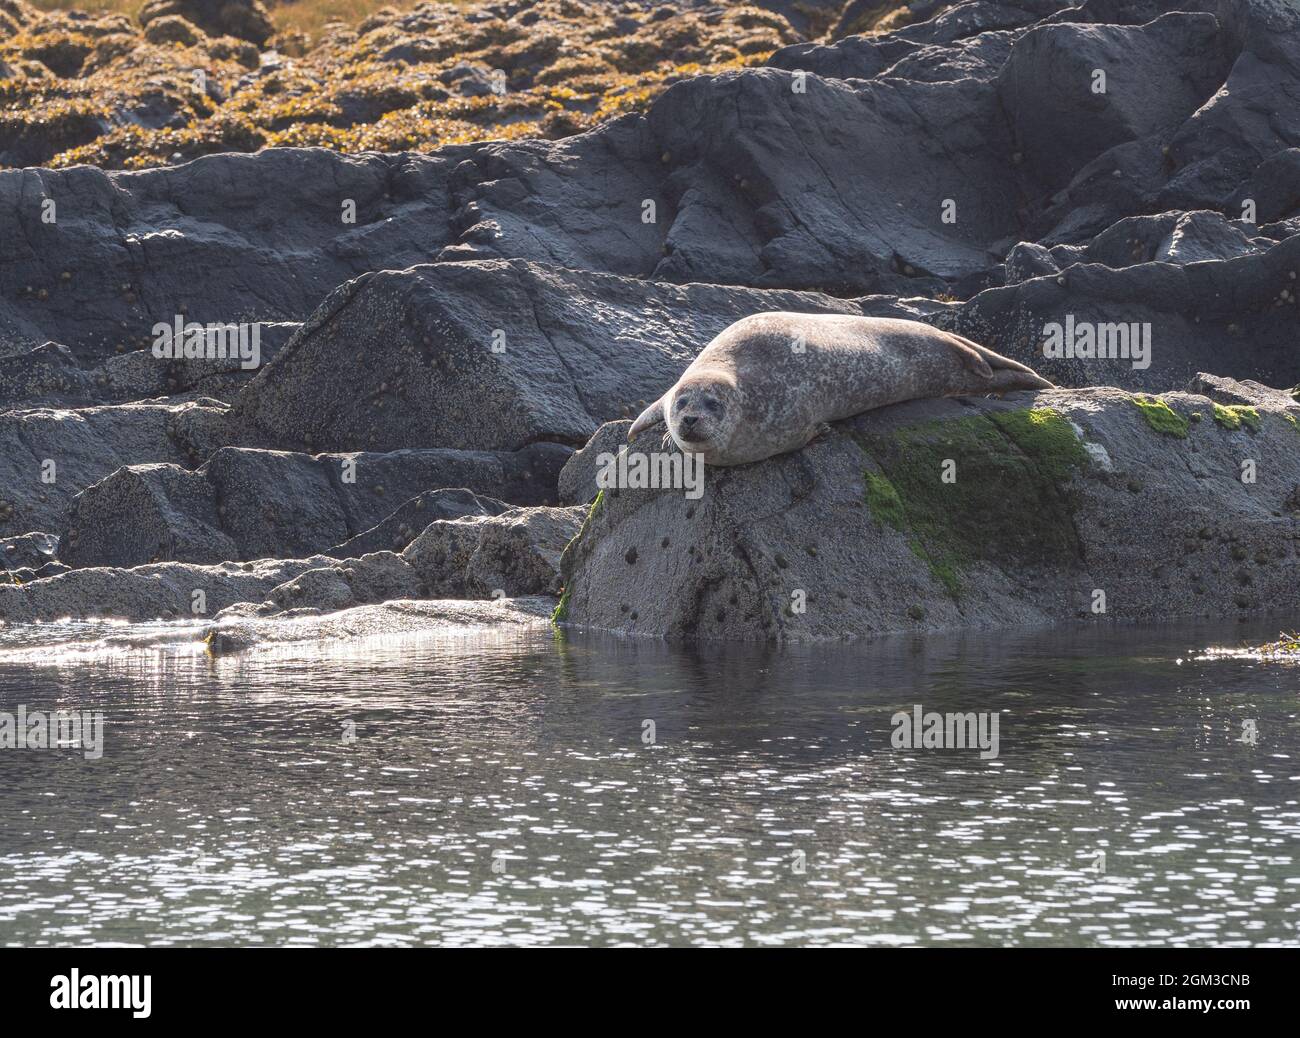 Common seals hauled out on rocks Stock Photo